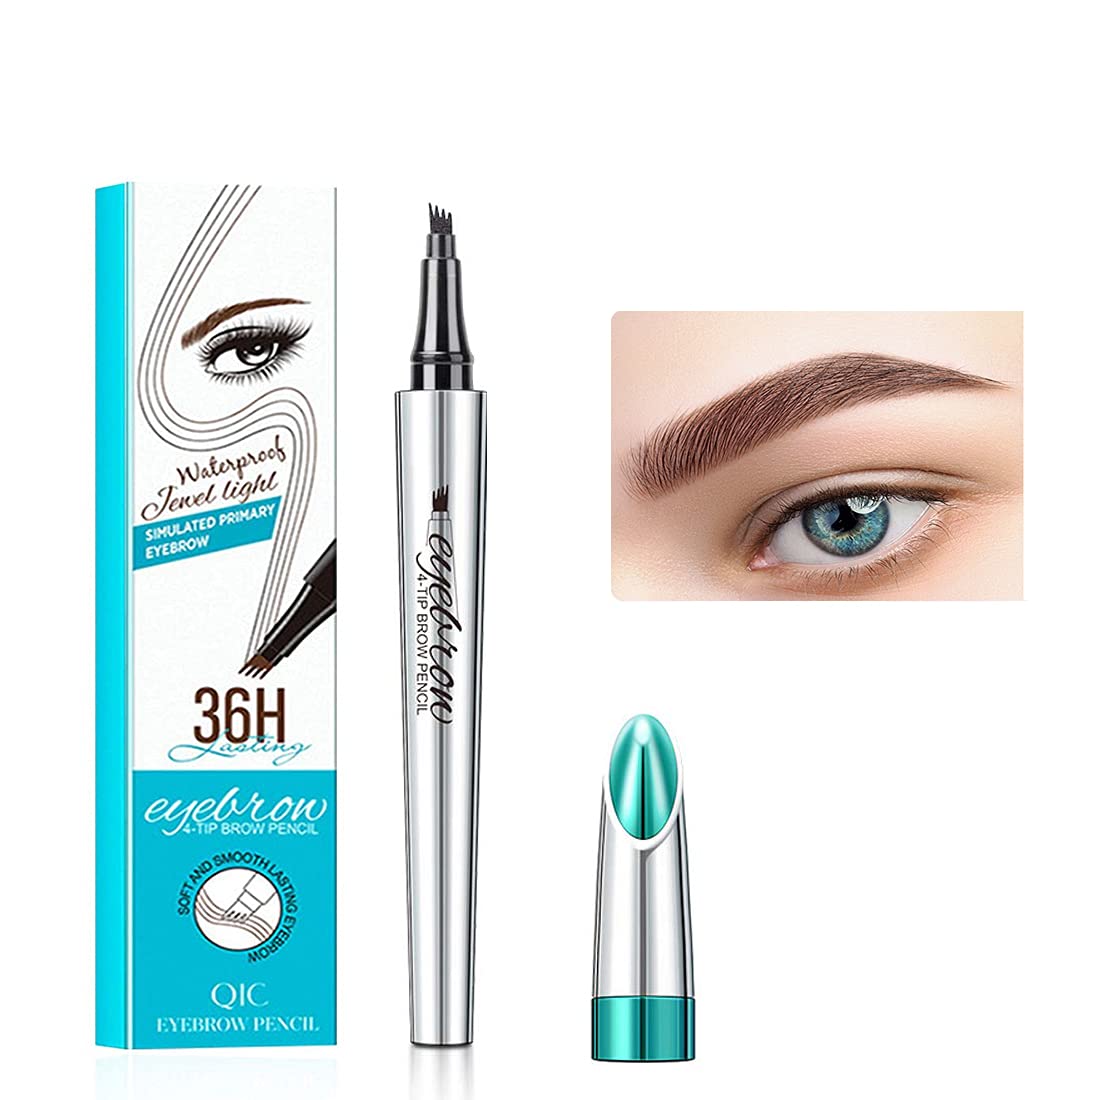 CUIFULI Eyebrow Pencil 4 Point Tips Eyebrow Make Up with Micro Fork Tip Applicator Durable Water and Smudge-proof Red-Brown, ‎red-brown